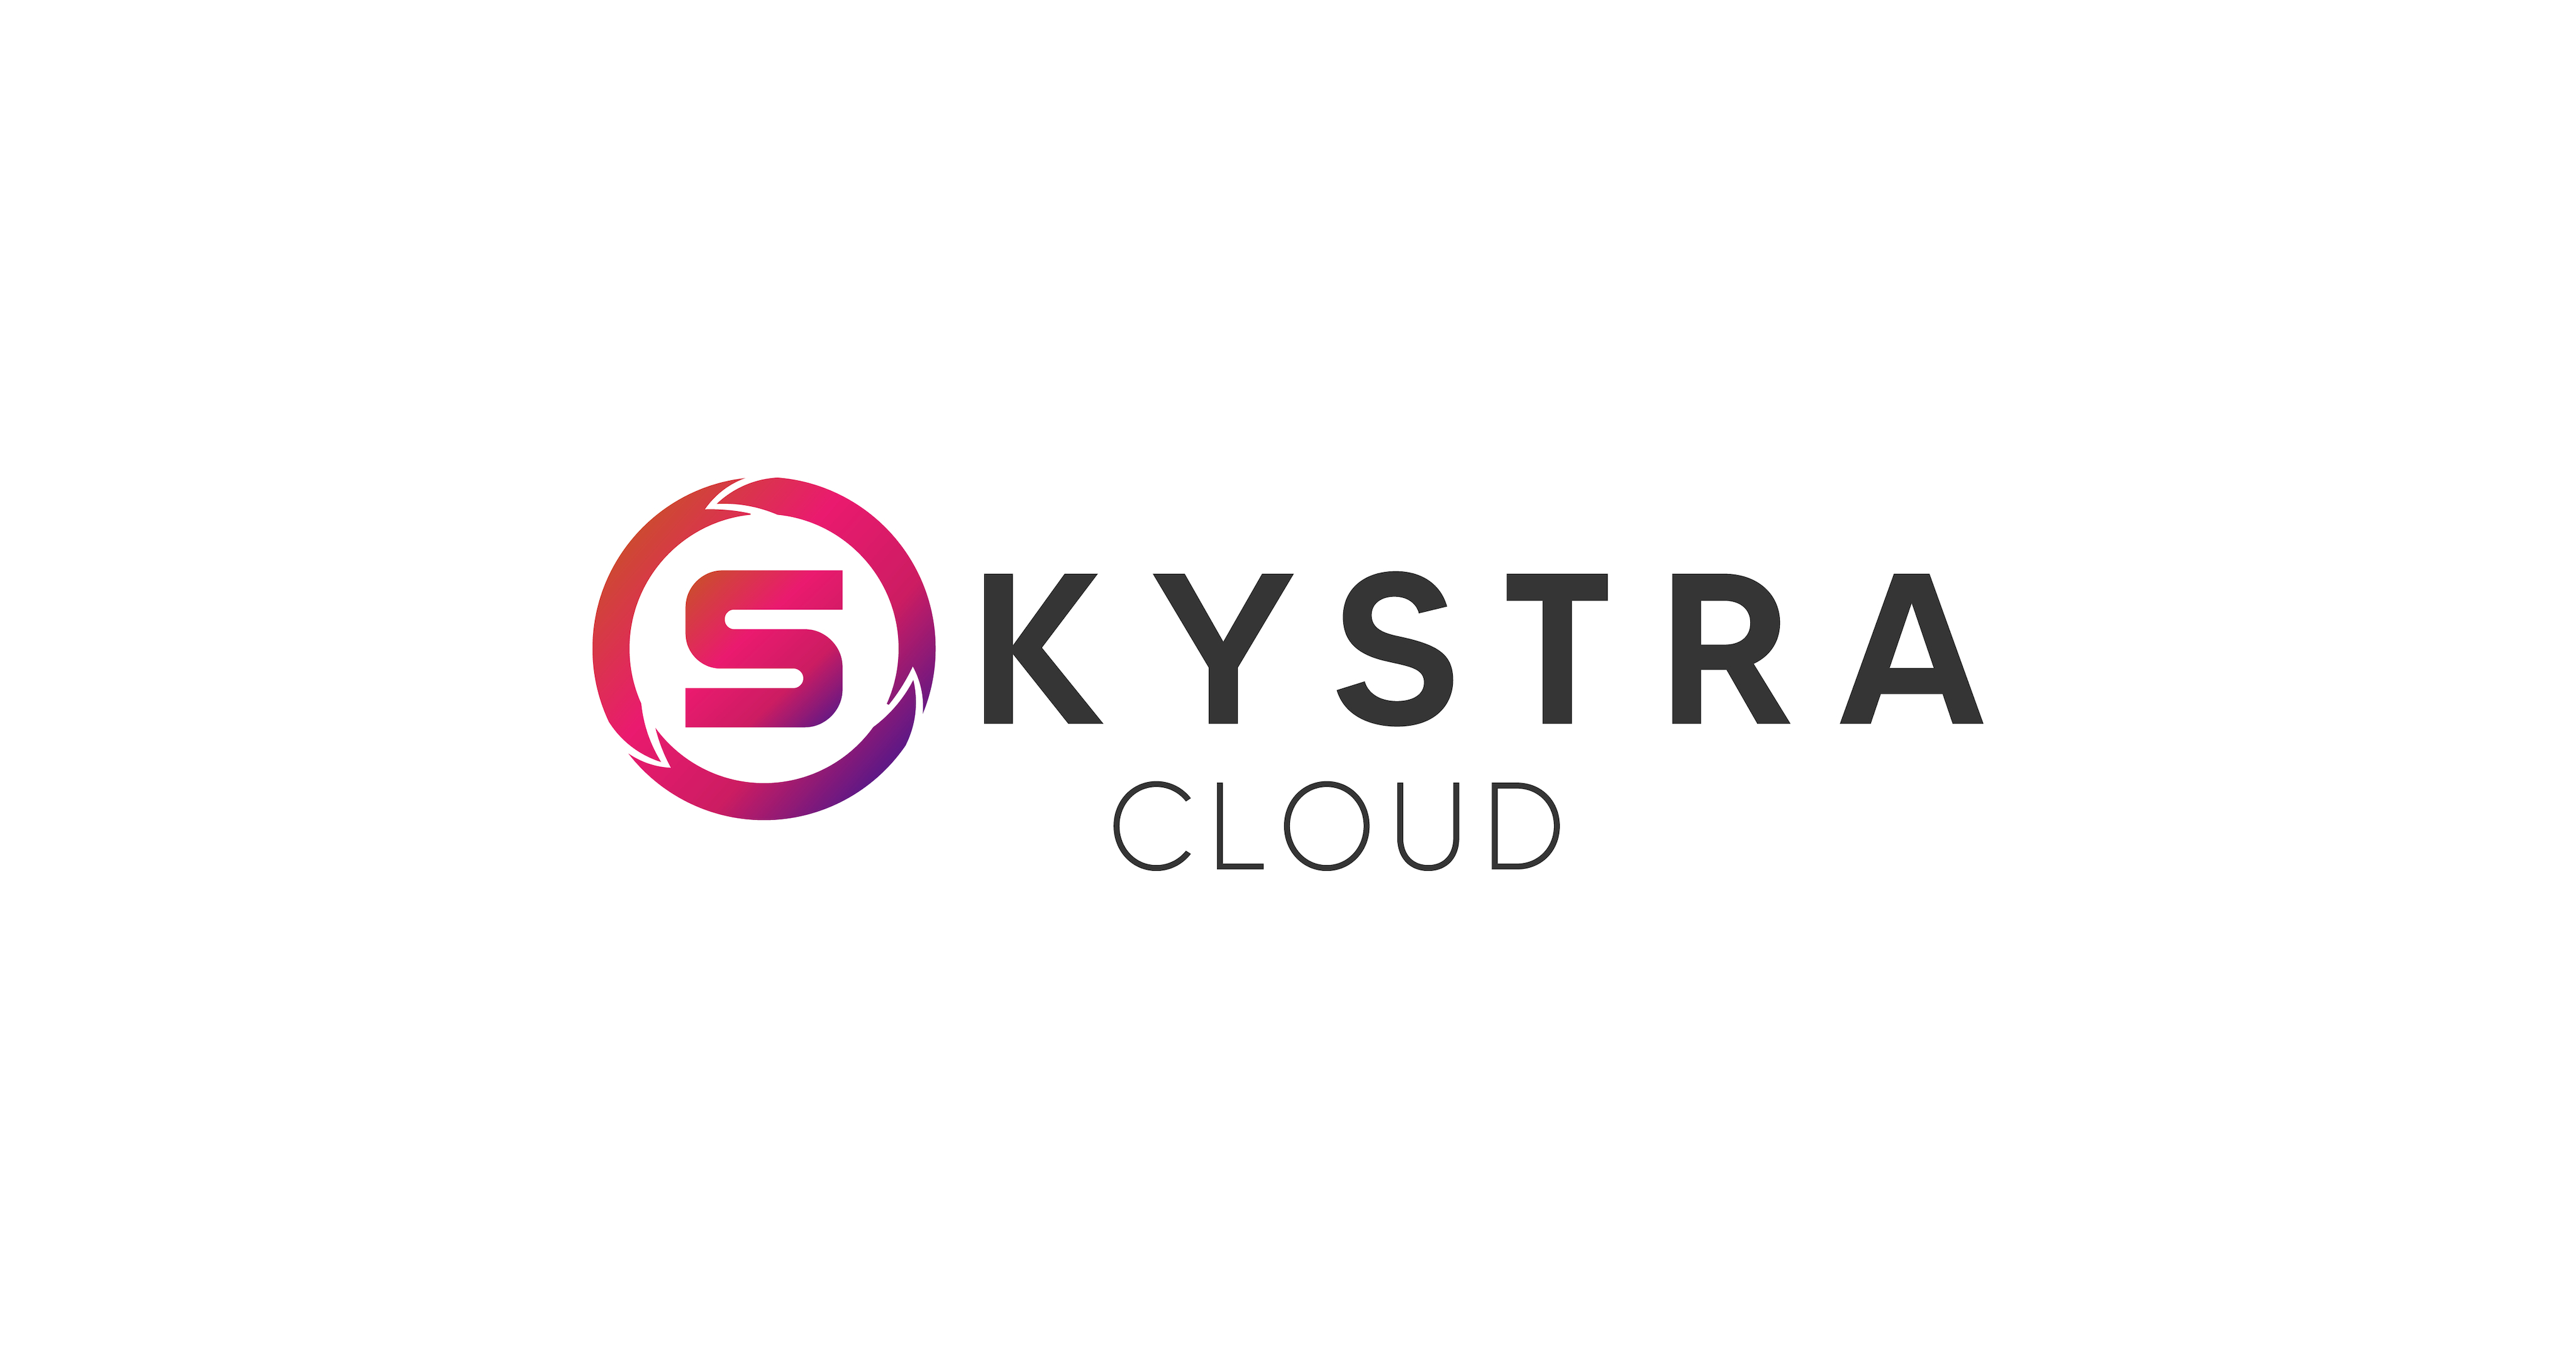 My Review of Skystra: Best Hosting Provider with 24/7 Customer Service